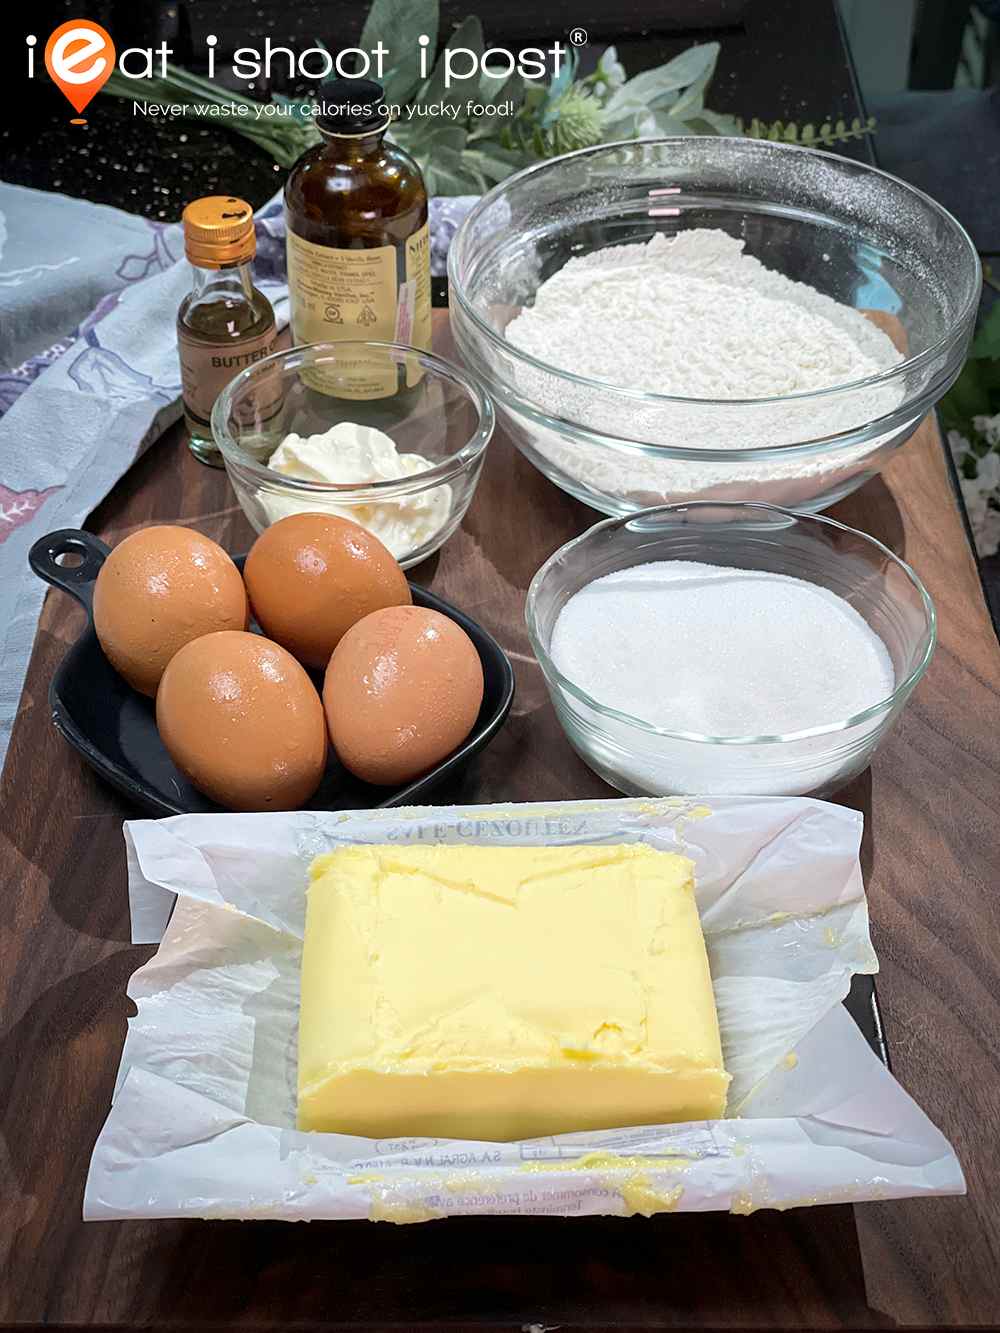 Ingredients from front to back - 250g block of Butter, 4 x 60g eggs, 150g castor sugar, 45g sour cream, 180g self-raising flour, vanilla essence and butter oil